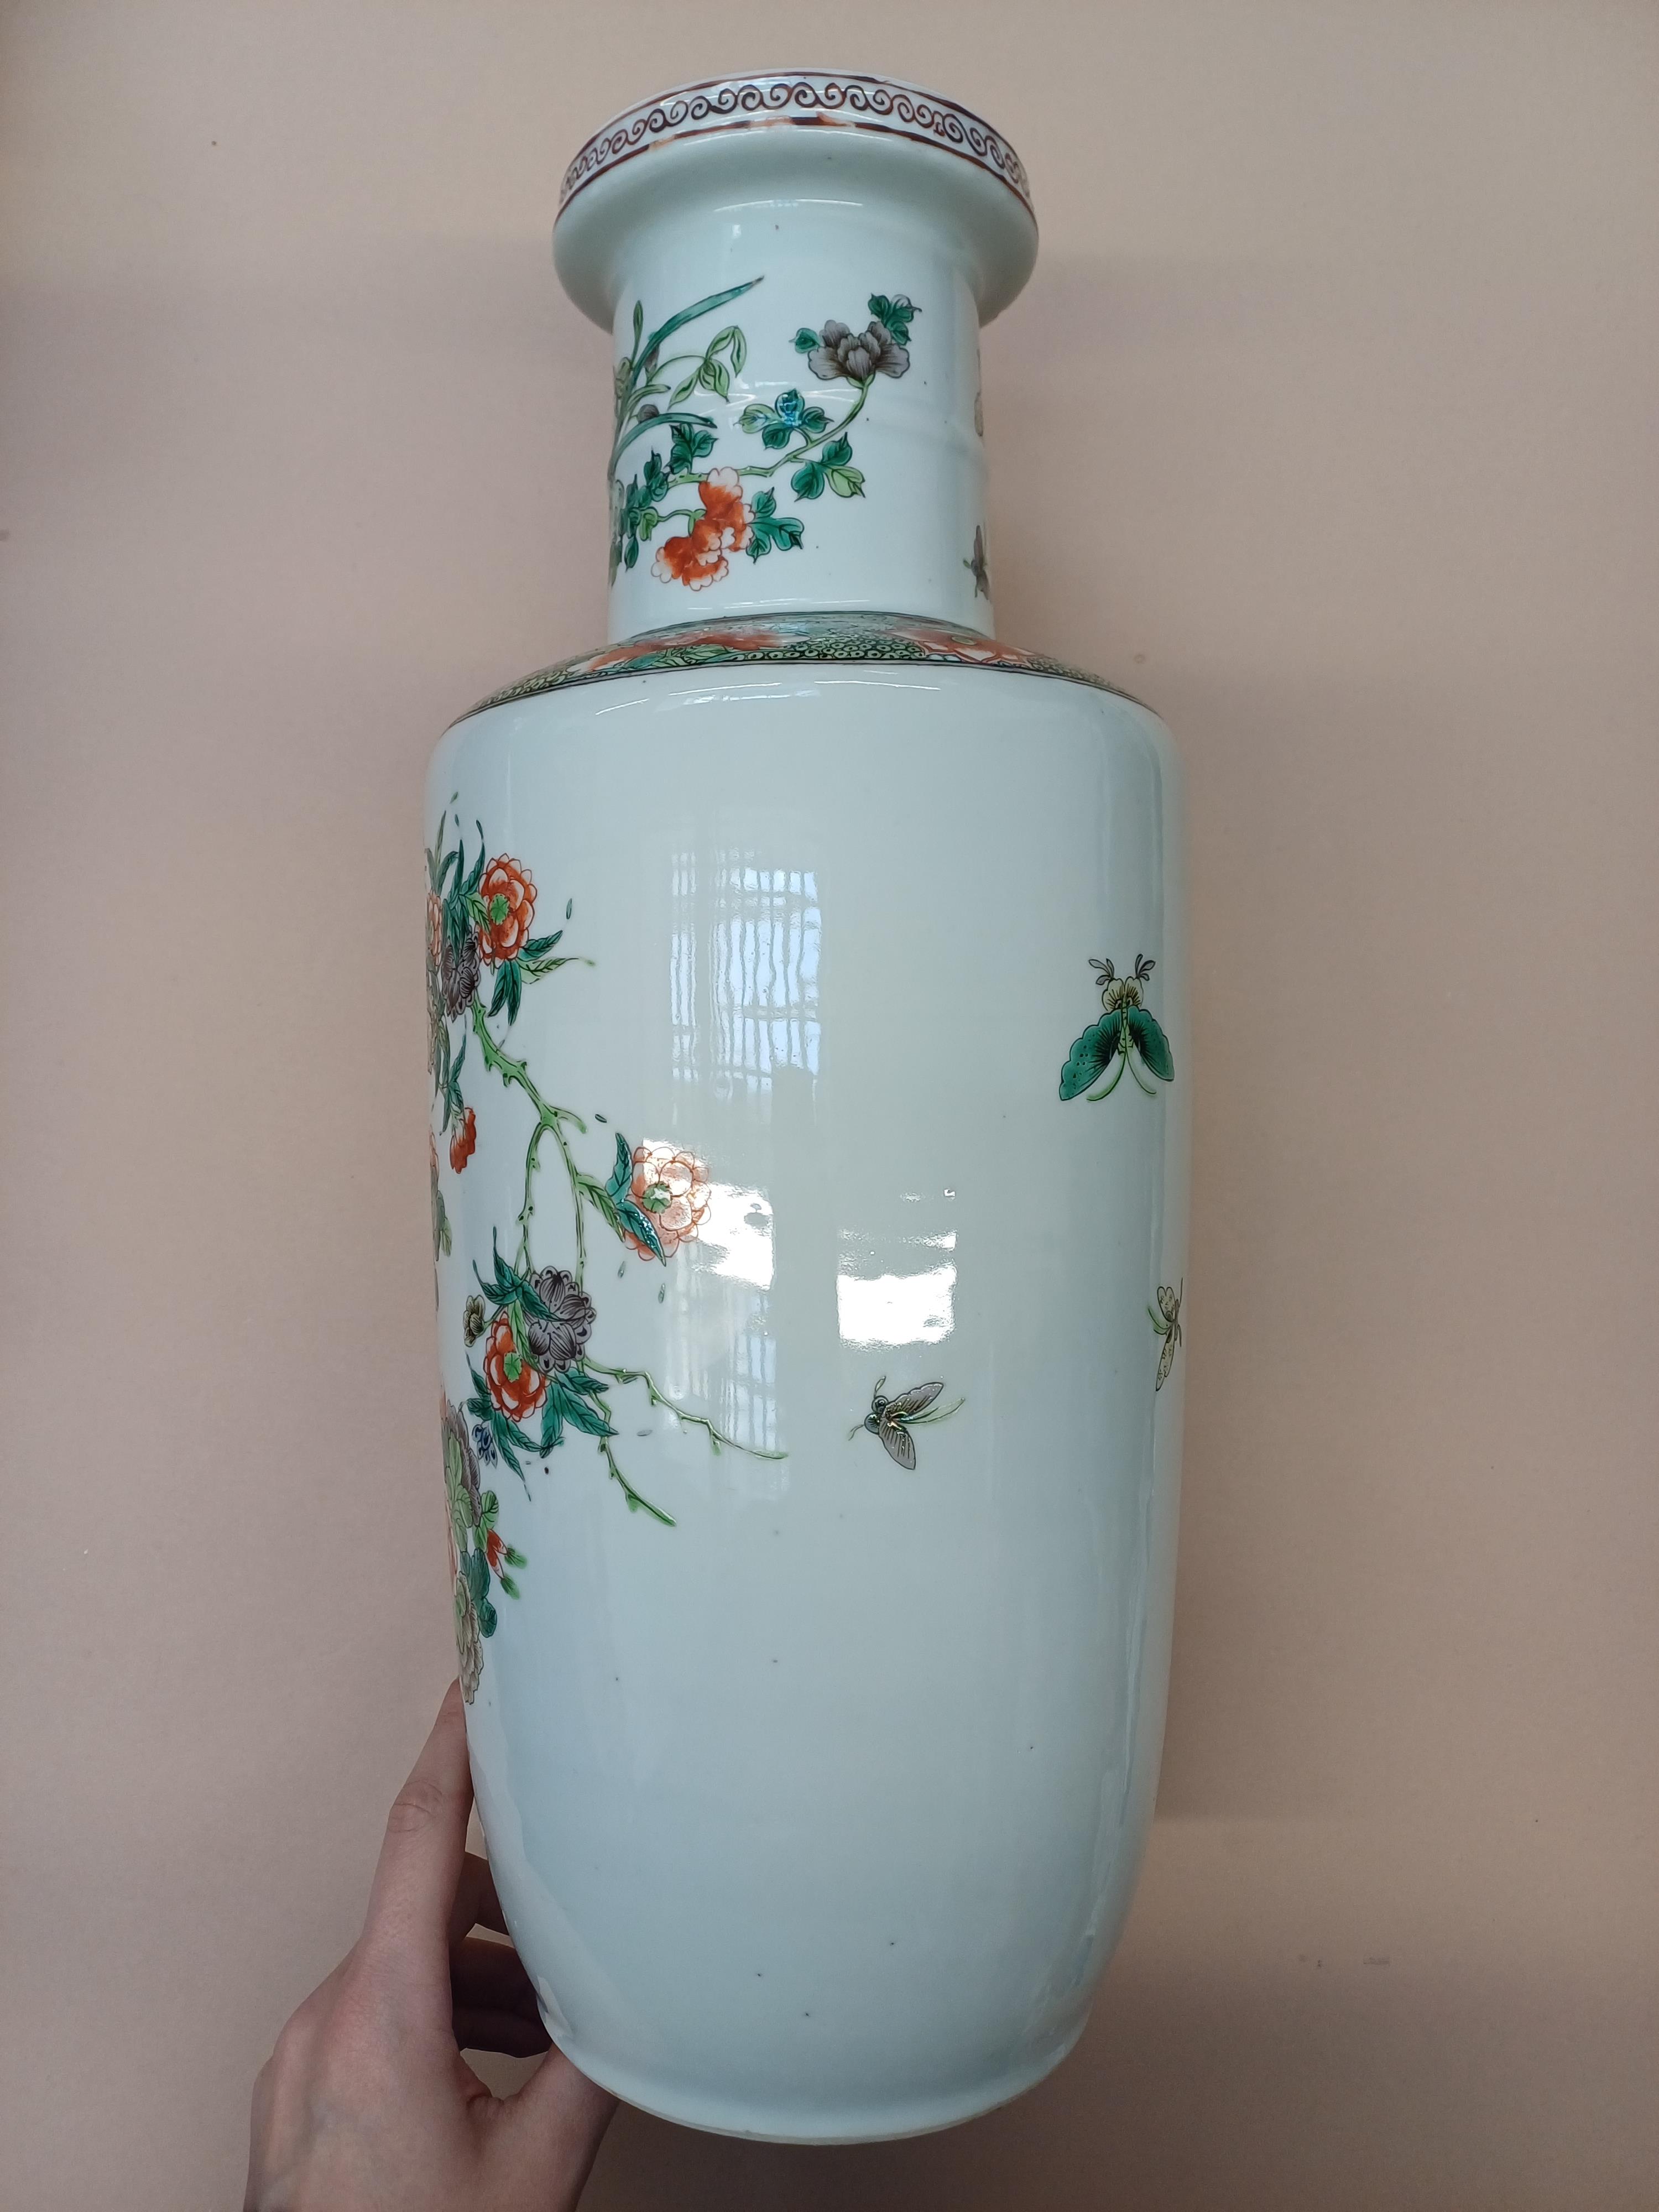 A PAIR OF FINE CHINESE FAMILLE-VERTE ‘BIRD AND BLOSSOM’ VASES 清康熙 五彩花鳥圖紋瓶一對 - Image 2 of 16